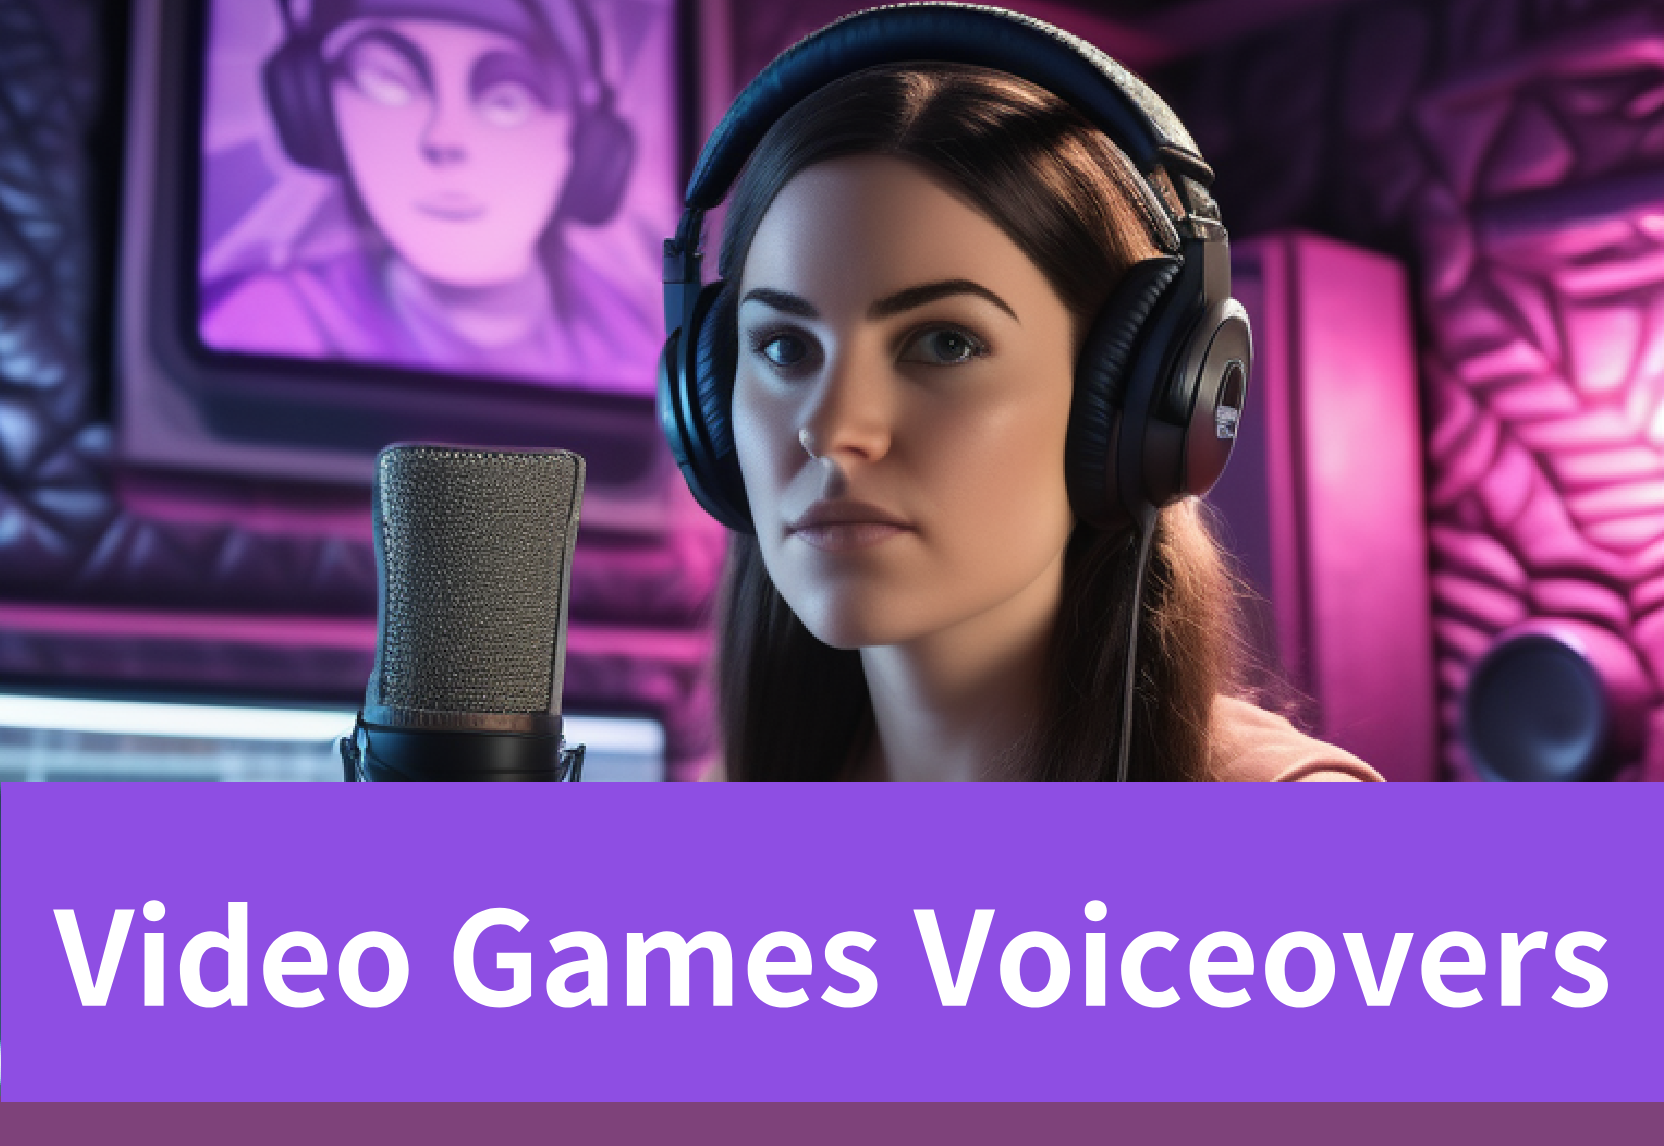 Standing Out in Video Games Voiceovers Industry